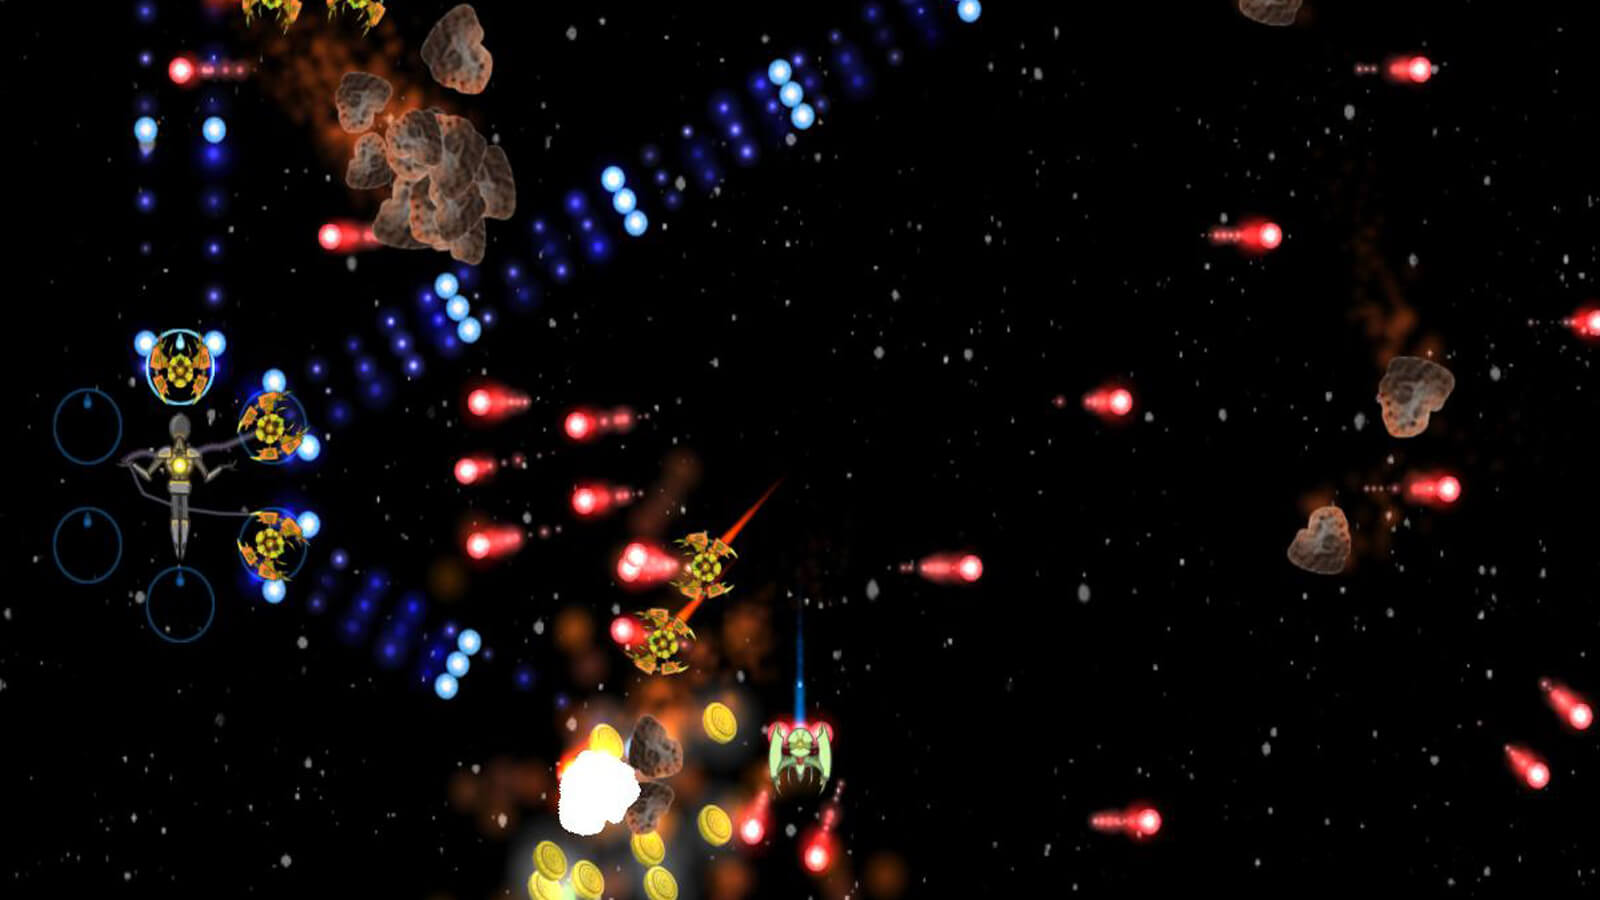 A humanoid controlling three ships shoots at enemy ships with blue beams.